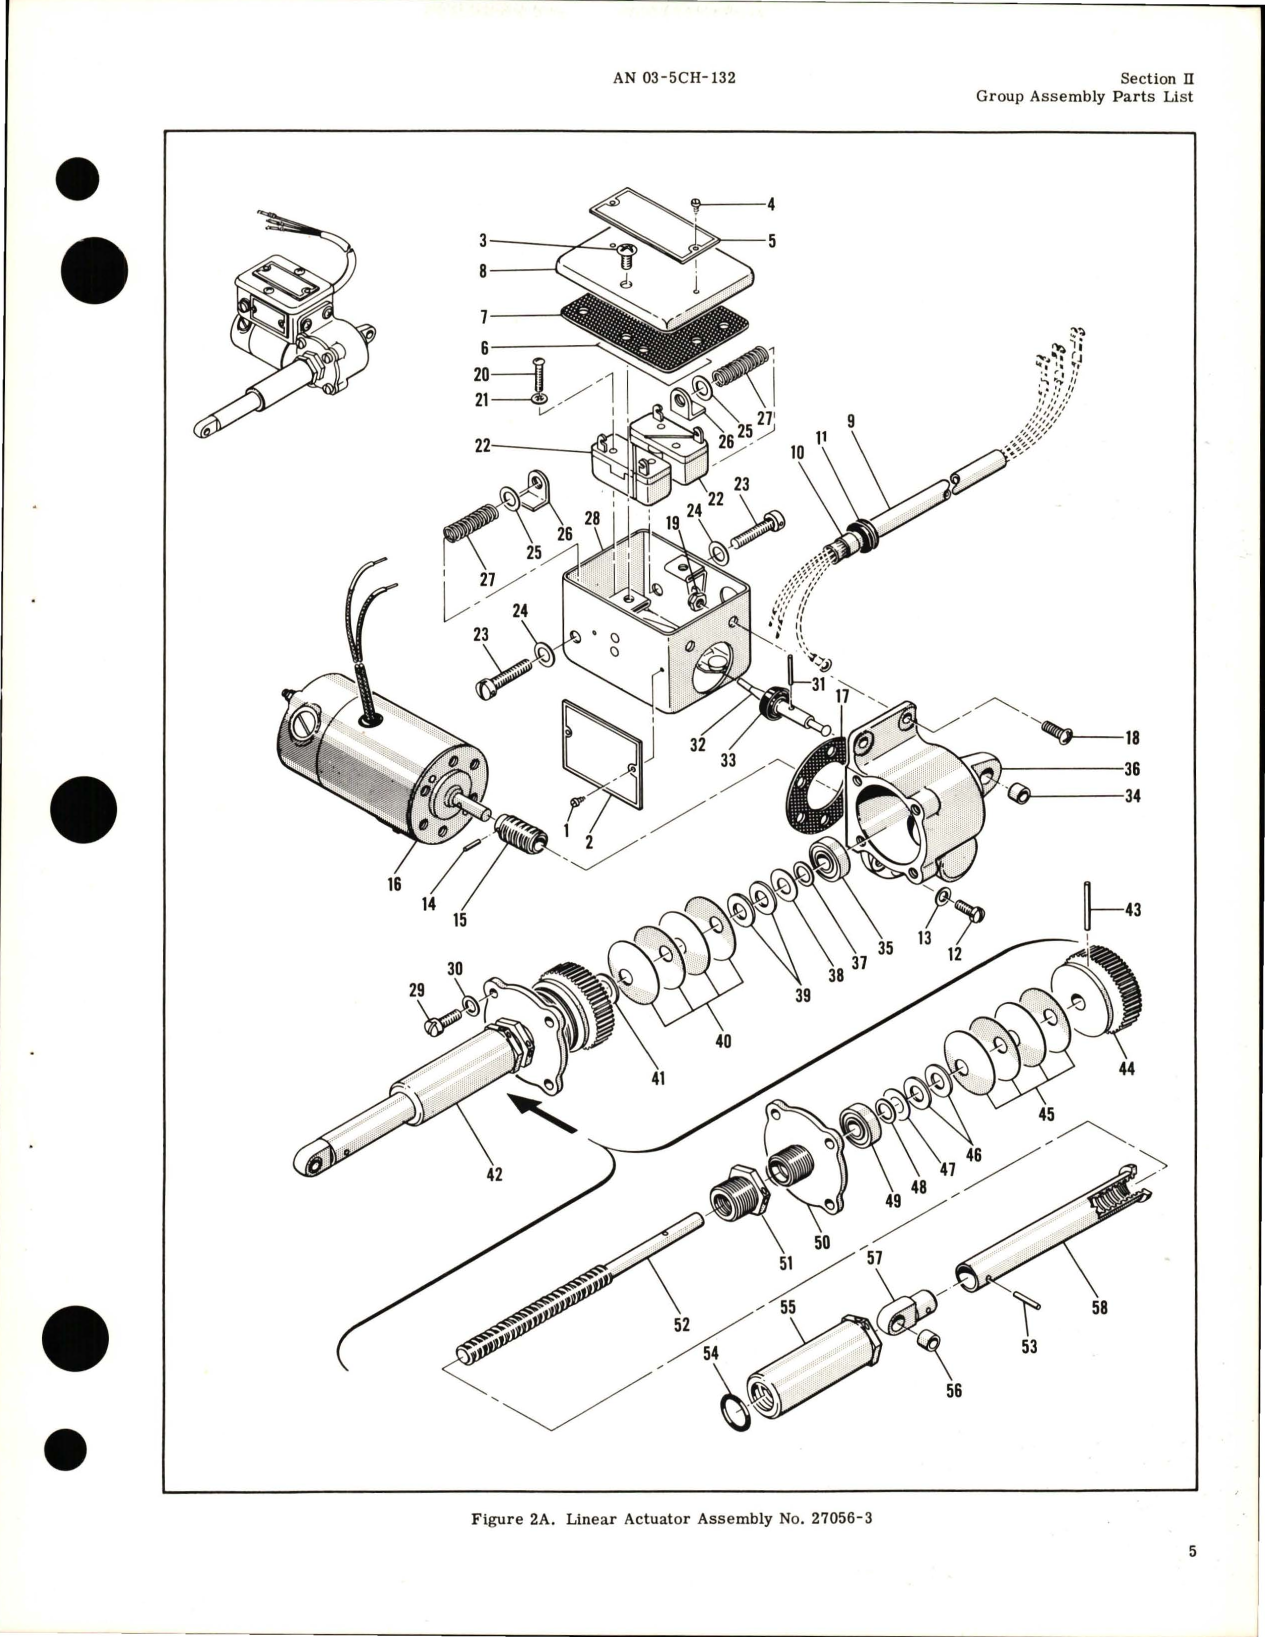 Sample page 9 from AirCorps Library document: Parts Catalog for Linear Load Limit Actuators